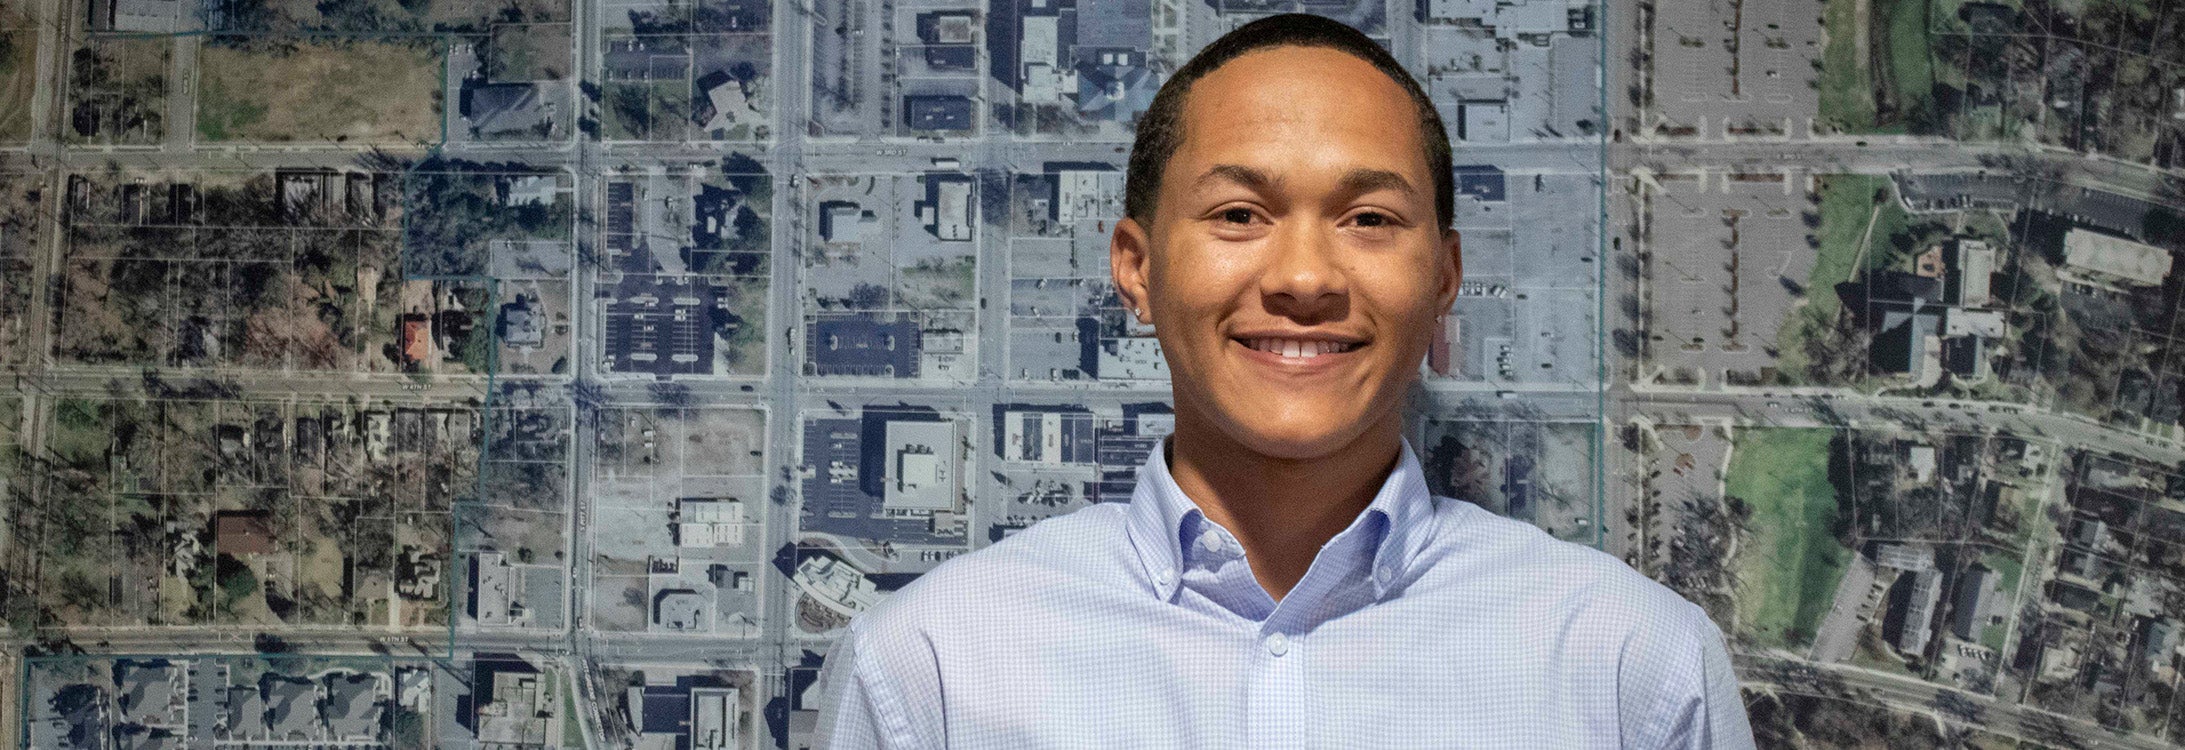 Through his summer internship with Uptown Greenville, William Stanton used his mapping skills and geographic information system mapping technology to pinpoint areas where extra parking spaces could be added.